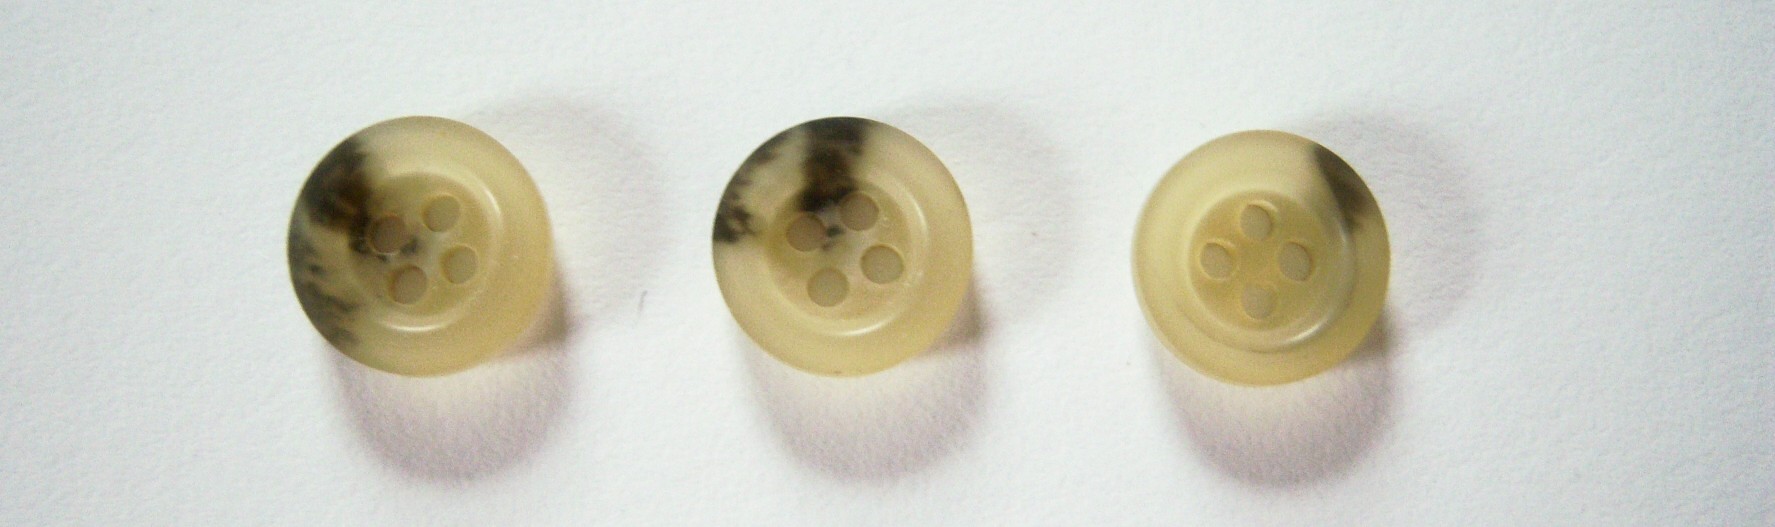 Opaque/Grey Marbled 7/16" 4 Hole Button